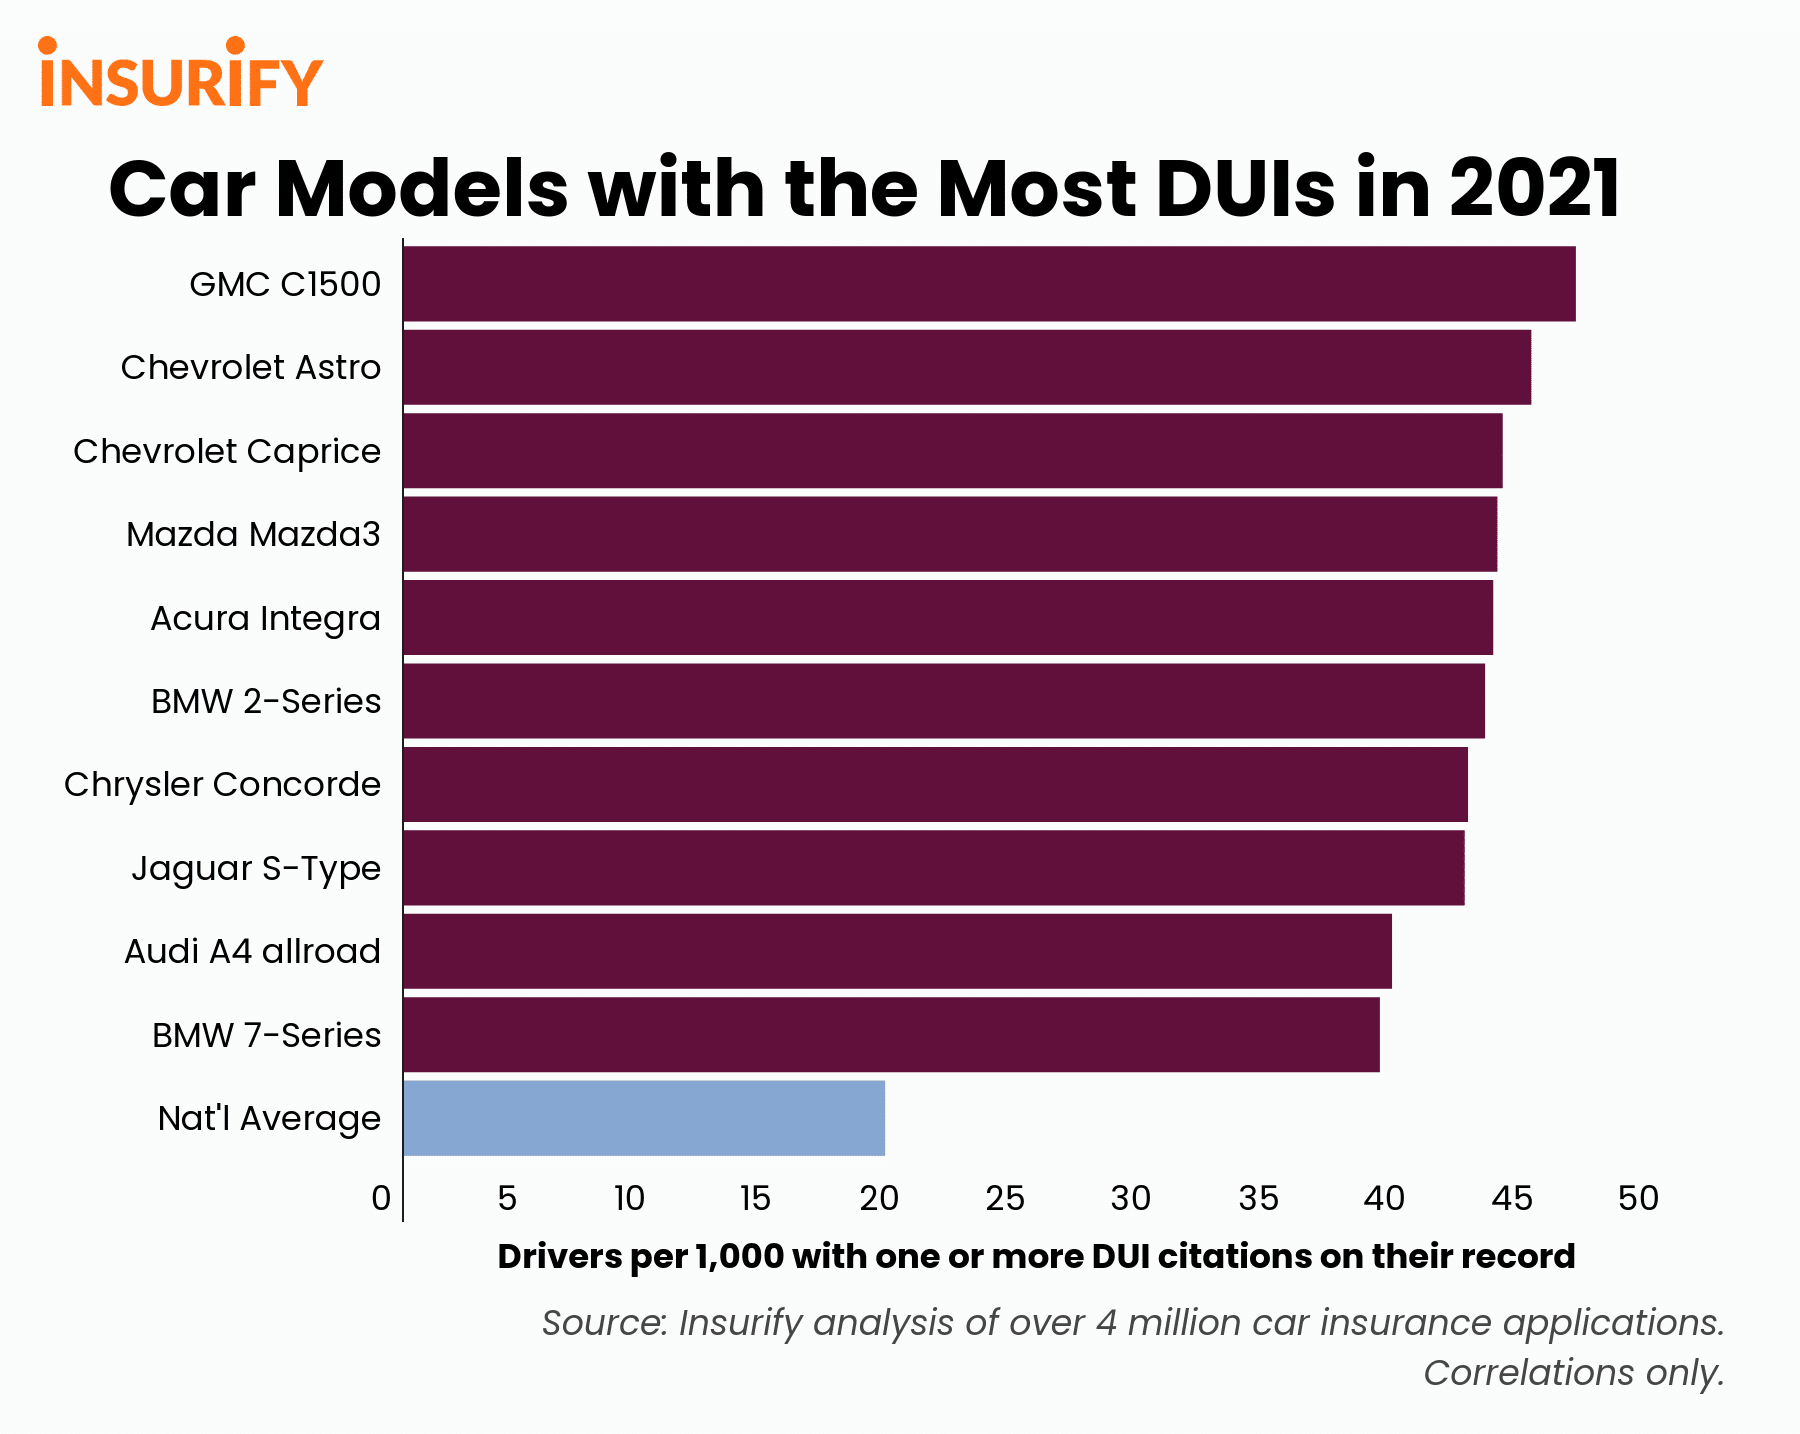 A bar graph showing the ten car models with the highest DUI rates in 2021.